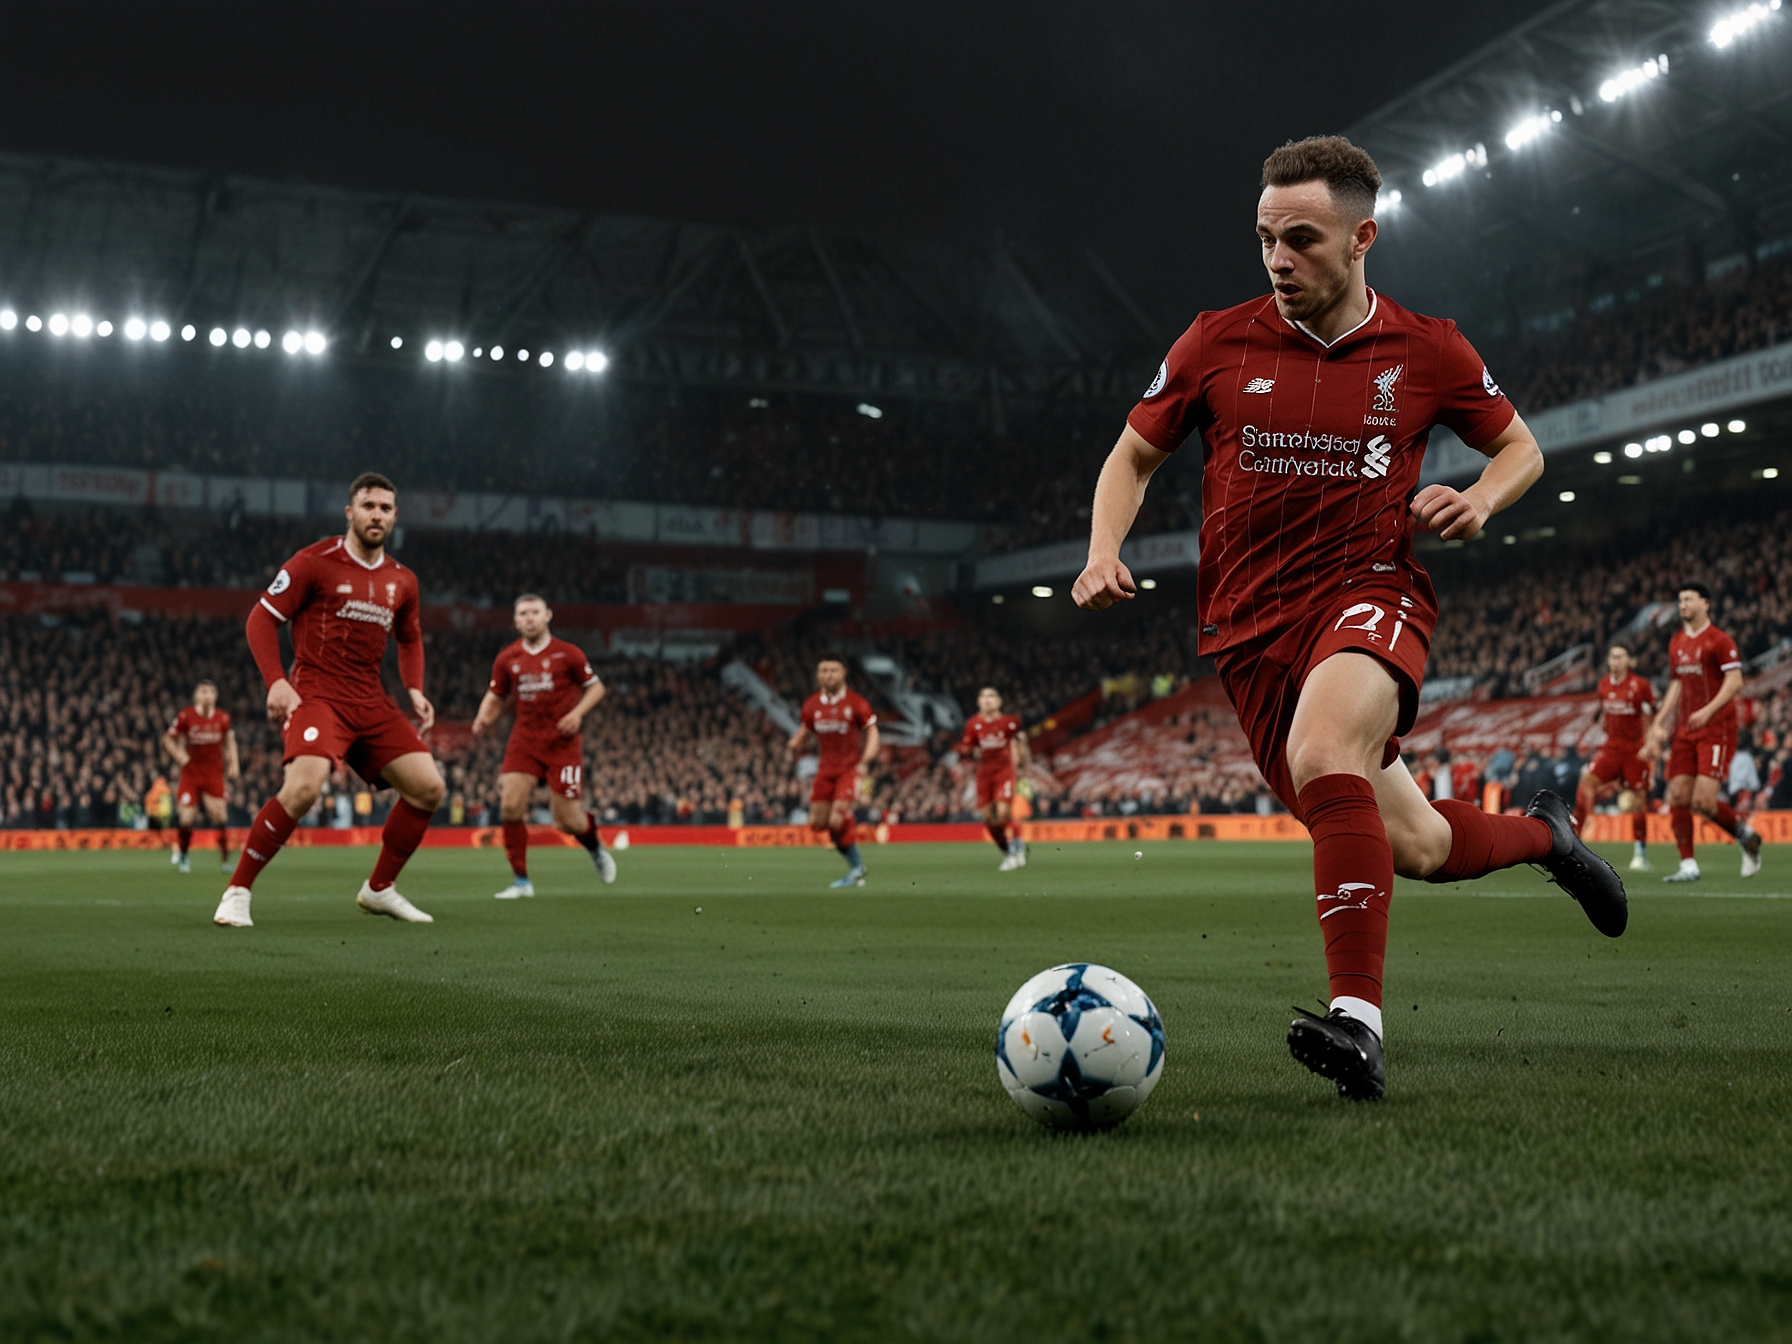 Diogo Jota in action for Liverpool FC, showcasing his agility and quick thinking as he navigates through defenders during a Premier League match.